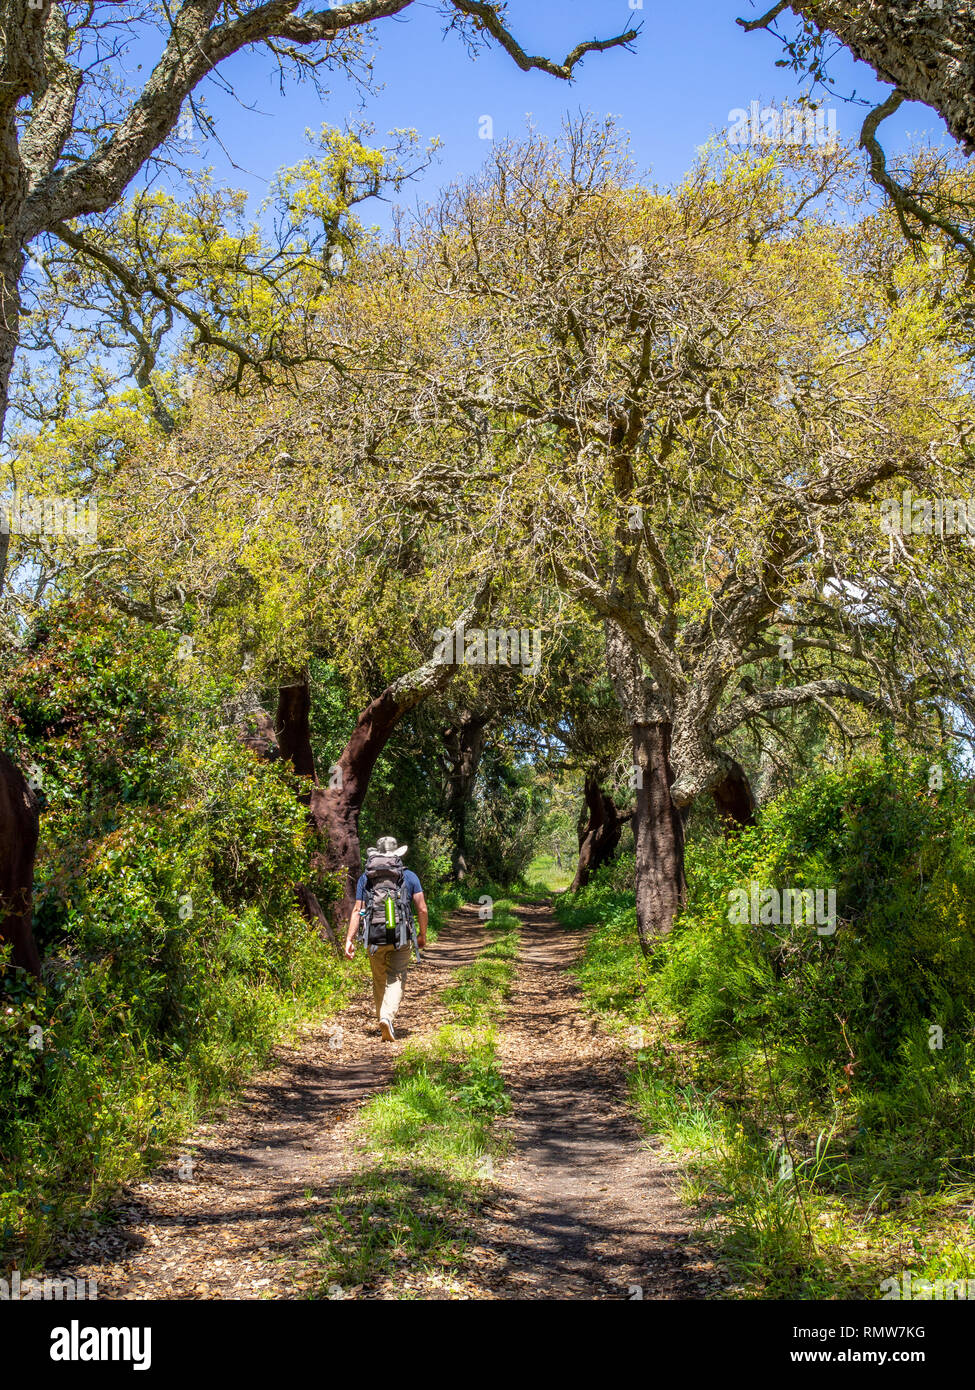 A trekker passing through a cork grove between Cercal do Alentejo and Porto Covo on the Rota Vicentina in southern Portugal. Stock Photo